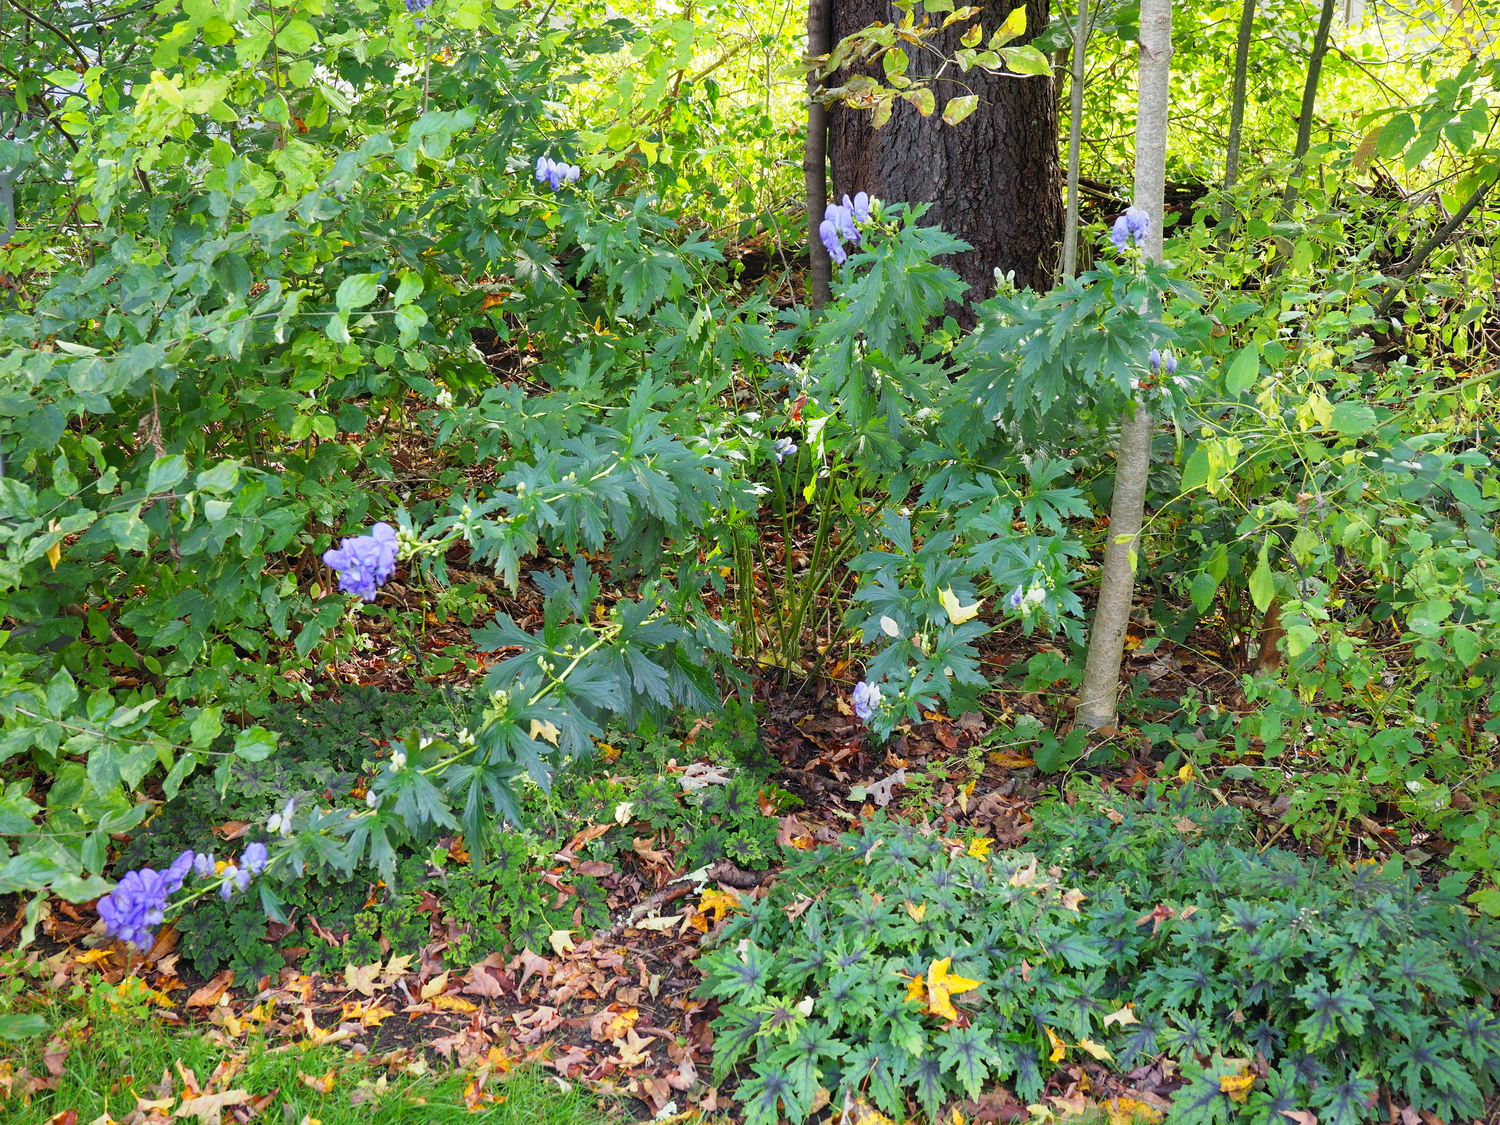 Aconitum nepellus growing in shade, like this one, will have very long stems that are budded from top to bottom. The stems can  be trimmed as needed and the plant will be more compact if it receives more sun.   ANDREW MESSINGER